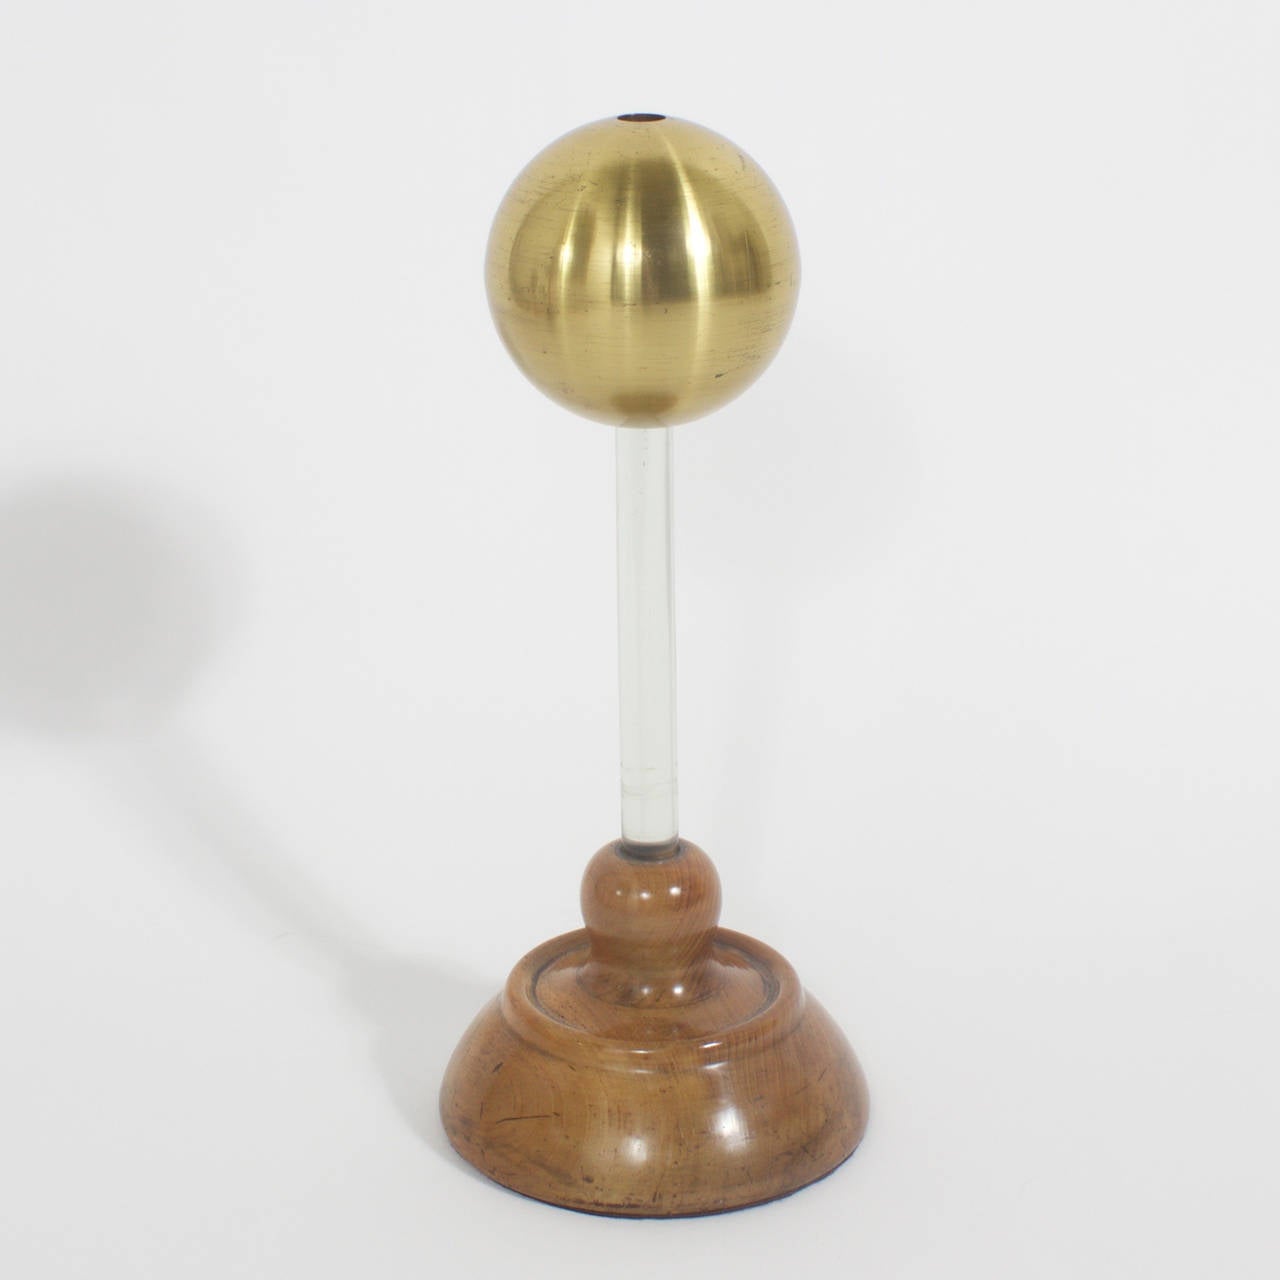 As if right out of a Jules Verne novel here is an assortment of four electrostatic conduction instruments that have a very sculptural vibe, with steampunk tones. Having upper spheres of brass, copper and chrome mounted on various colored Lucite